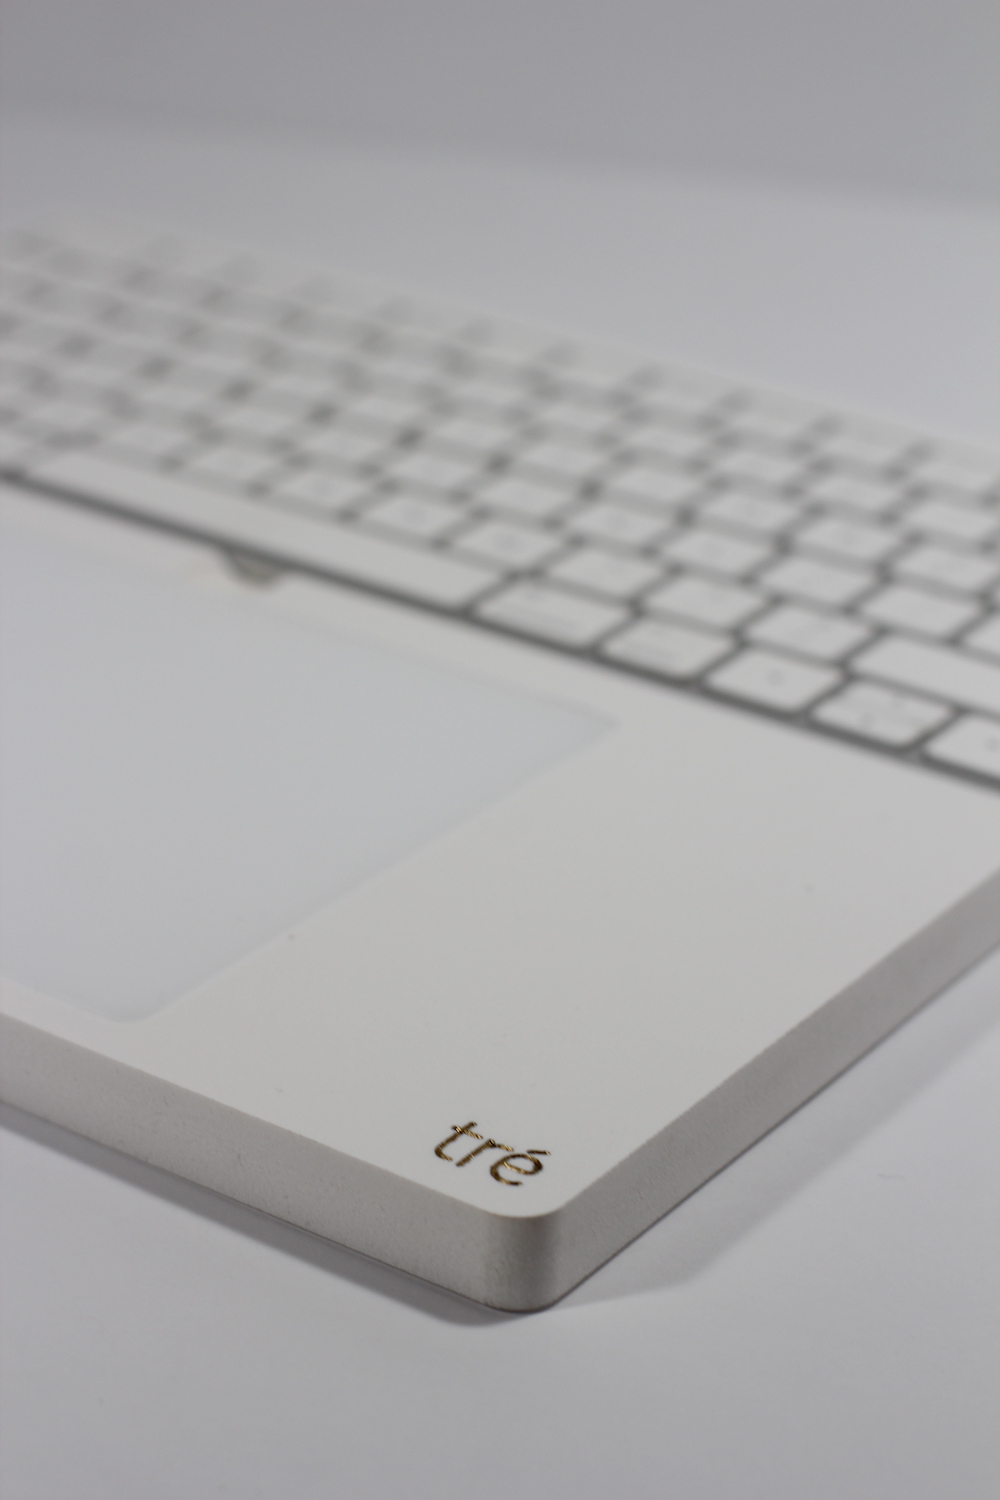 The tré  Apple Bluetooth Magic Trackpad and Keyboard Tray - PurposeMade